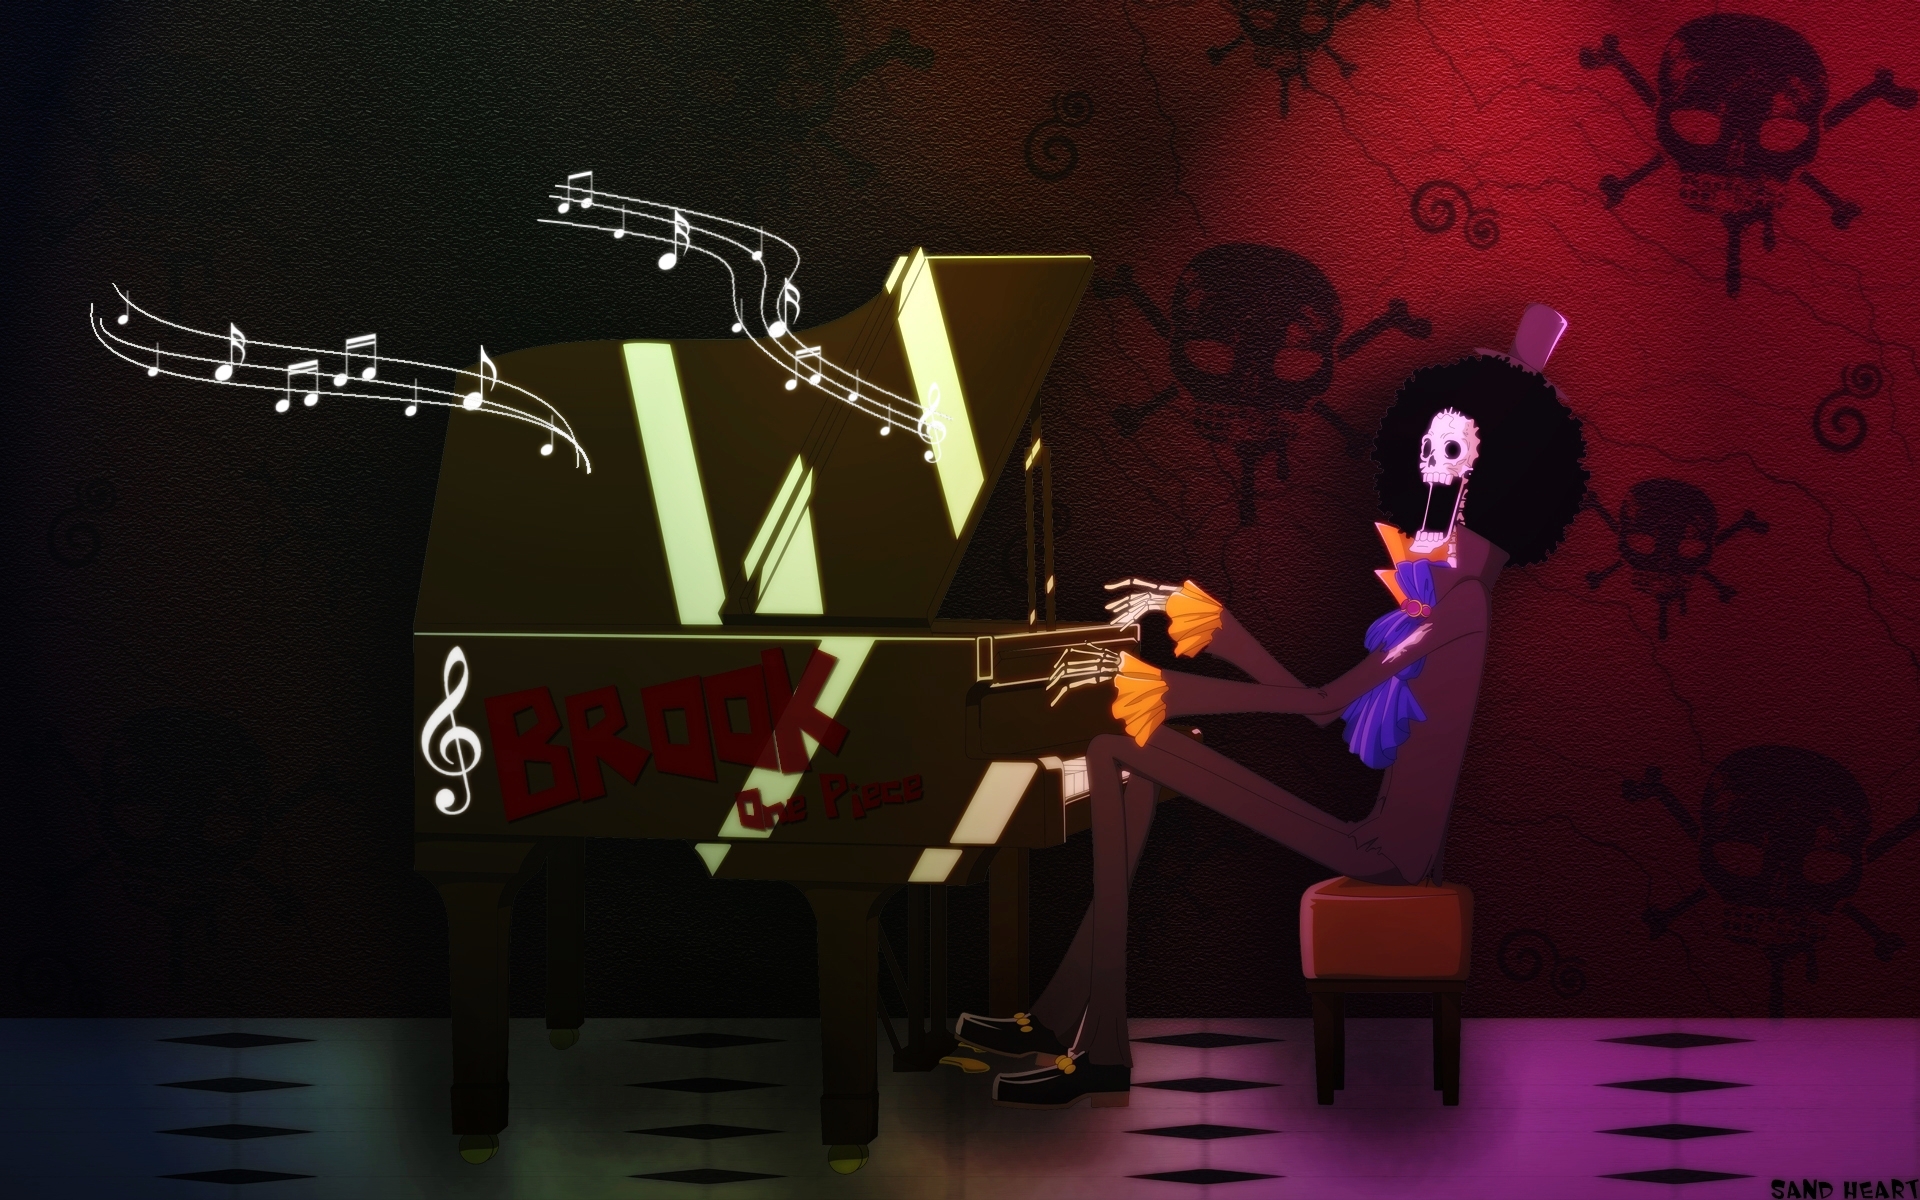 Brook Playing Piano Wallpaper   One Piece Anime Wallpaper 1920x1200